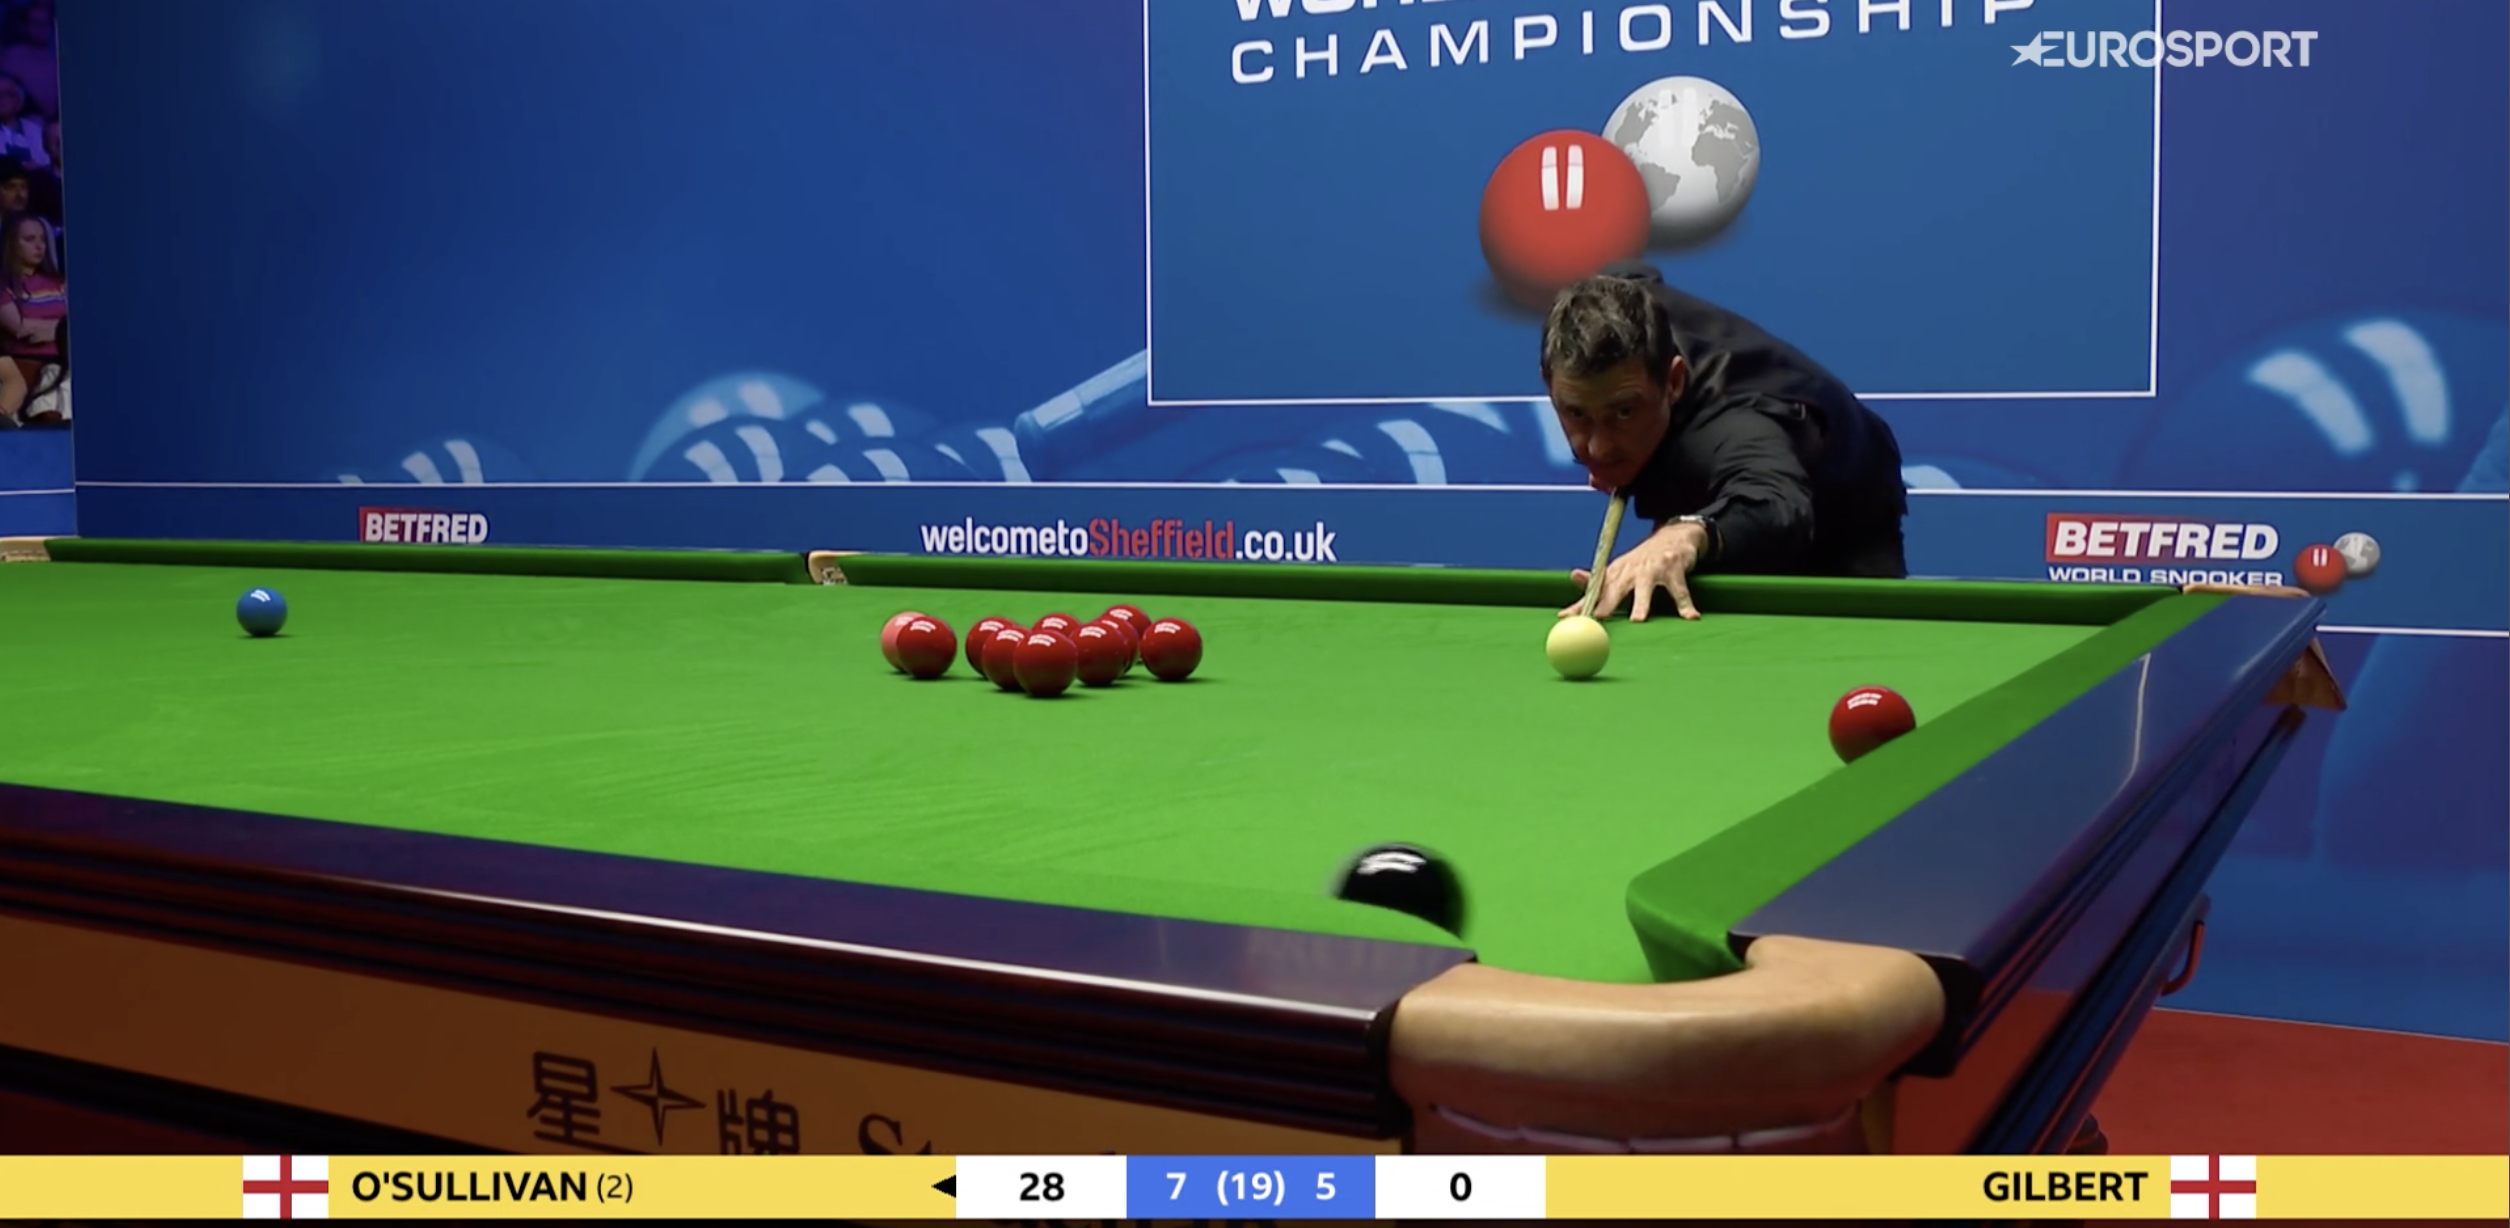 Ronnie OSullivan fined for obscene gestures at the World Championship and UK Championship